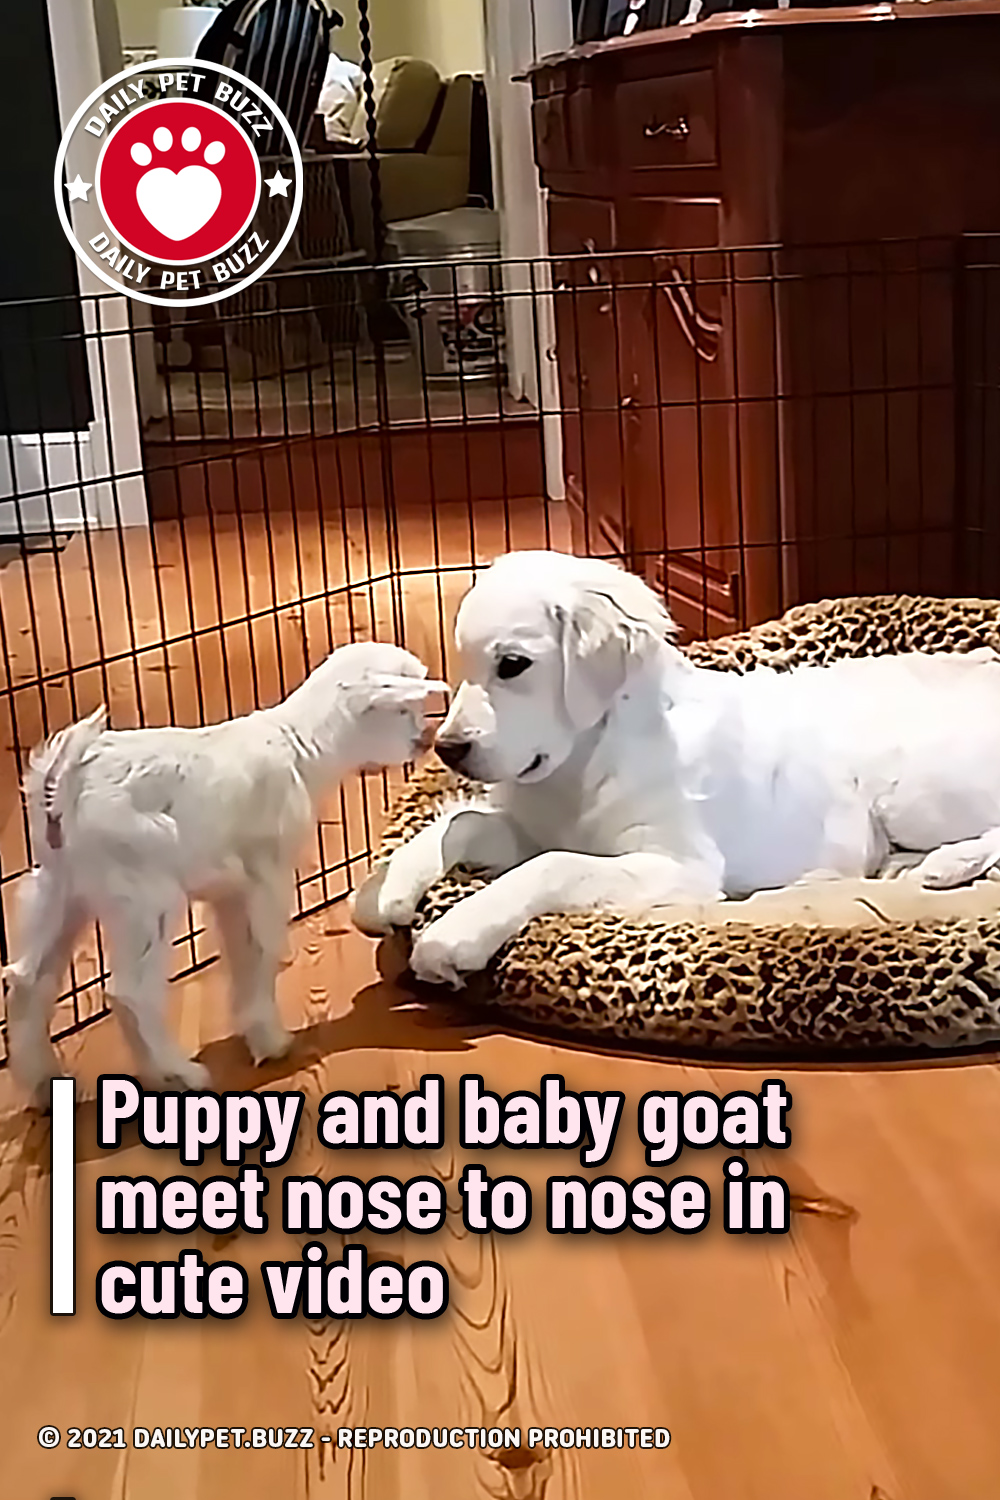 Puppy and baby goat meet nose to nose in cute video